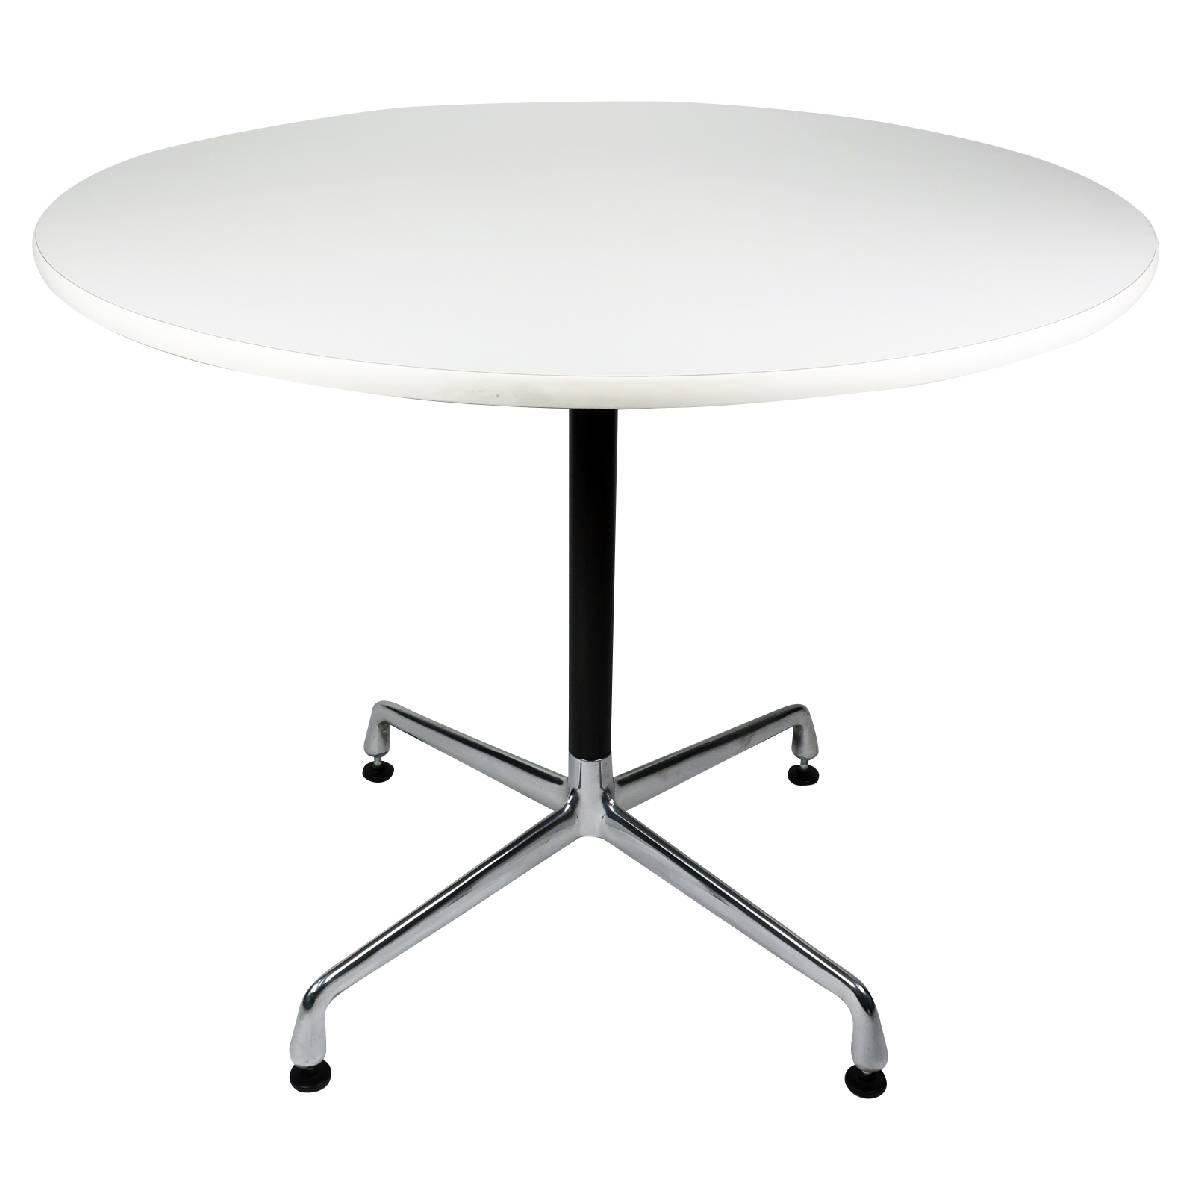 From Ray & Charles Eames’ iconic Aluminum Group collection for Herman Miller, this timeless Mid-Century Modern Classic is as much at home in a breakfast nook as in an office. With a 36” top, this is perfect for apartments and other smaller